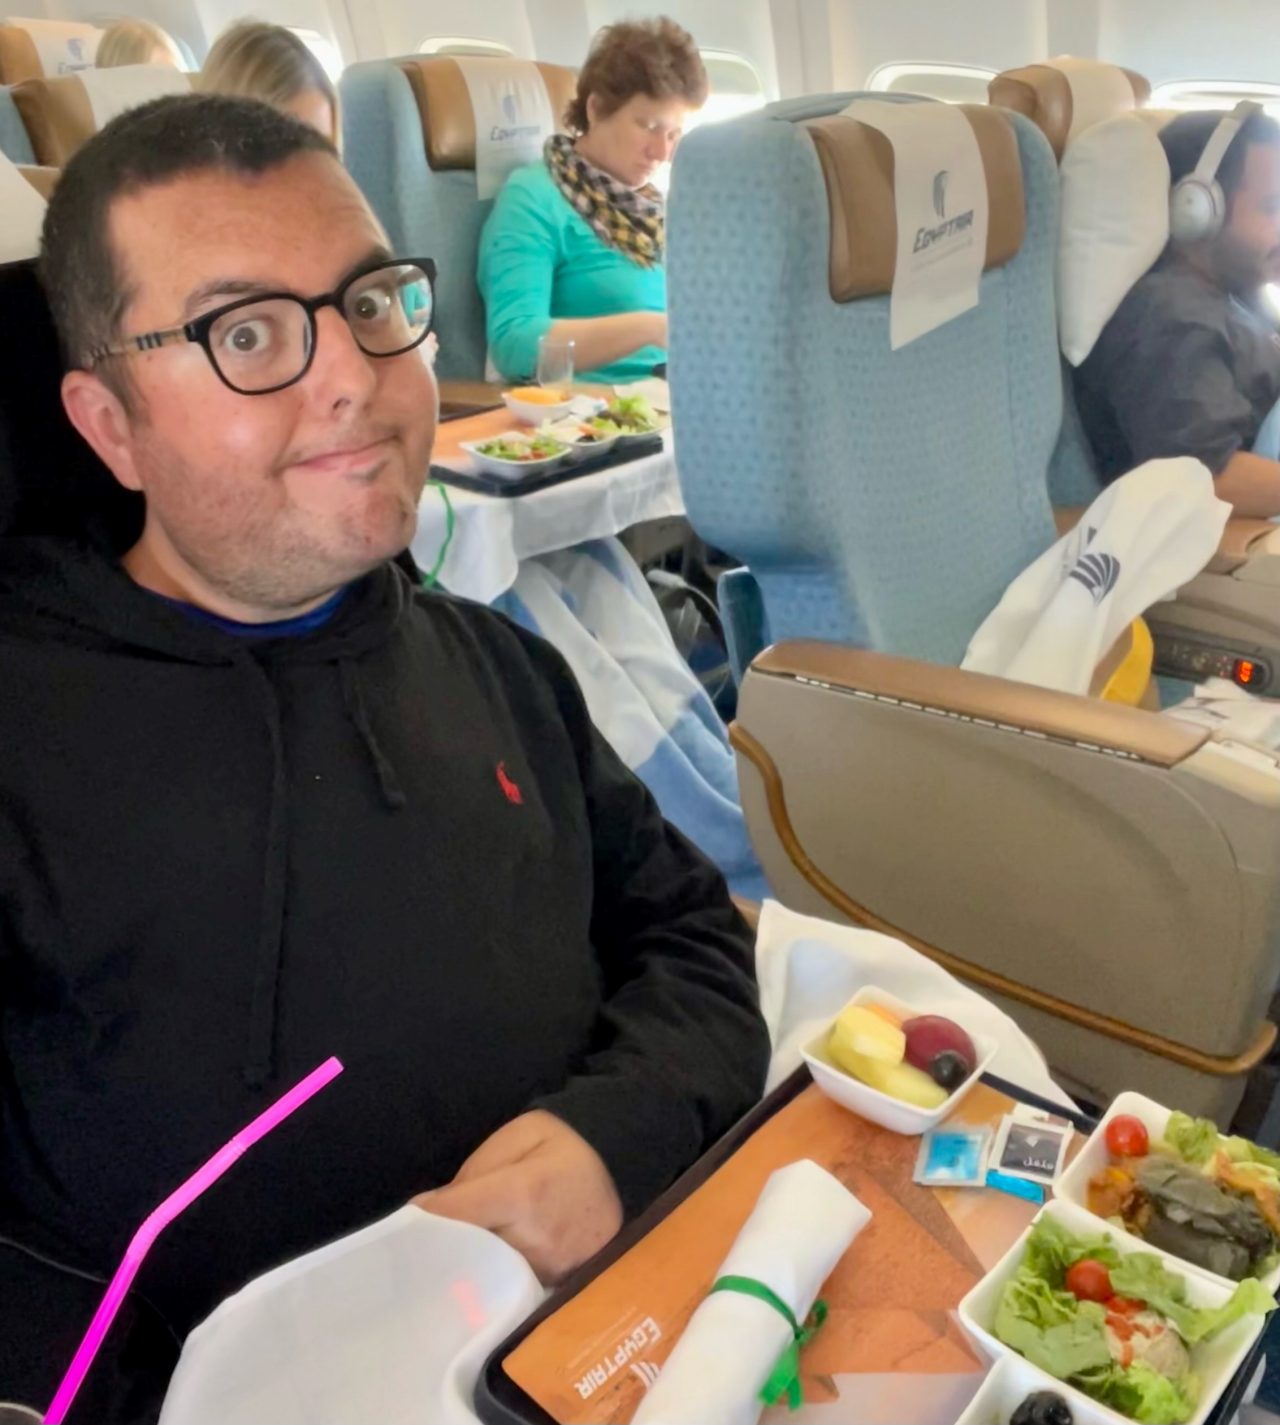 wheelchair user eating on airplane